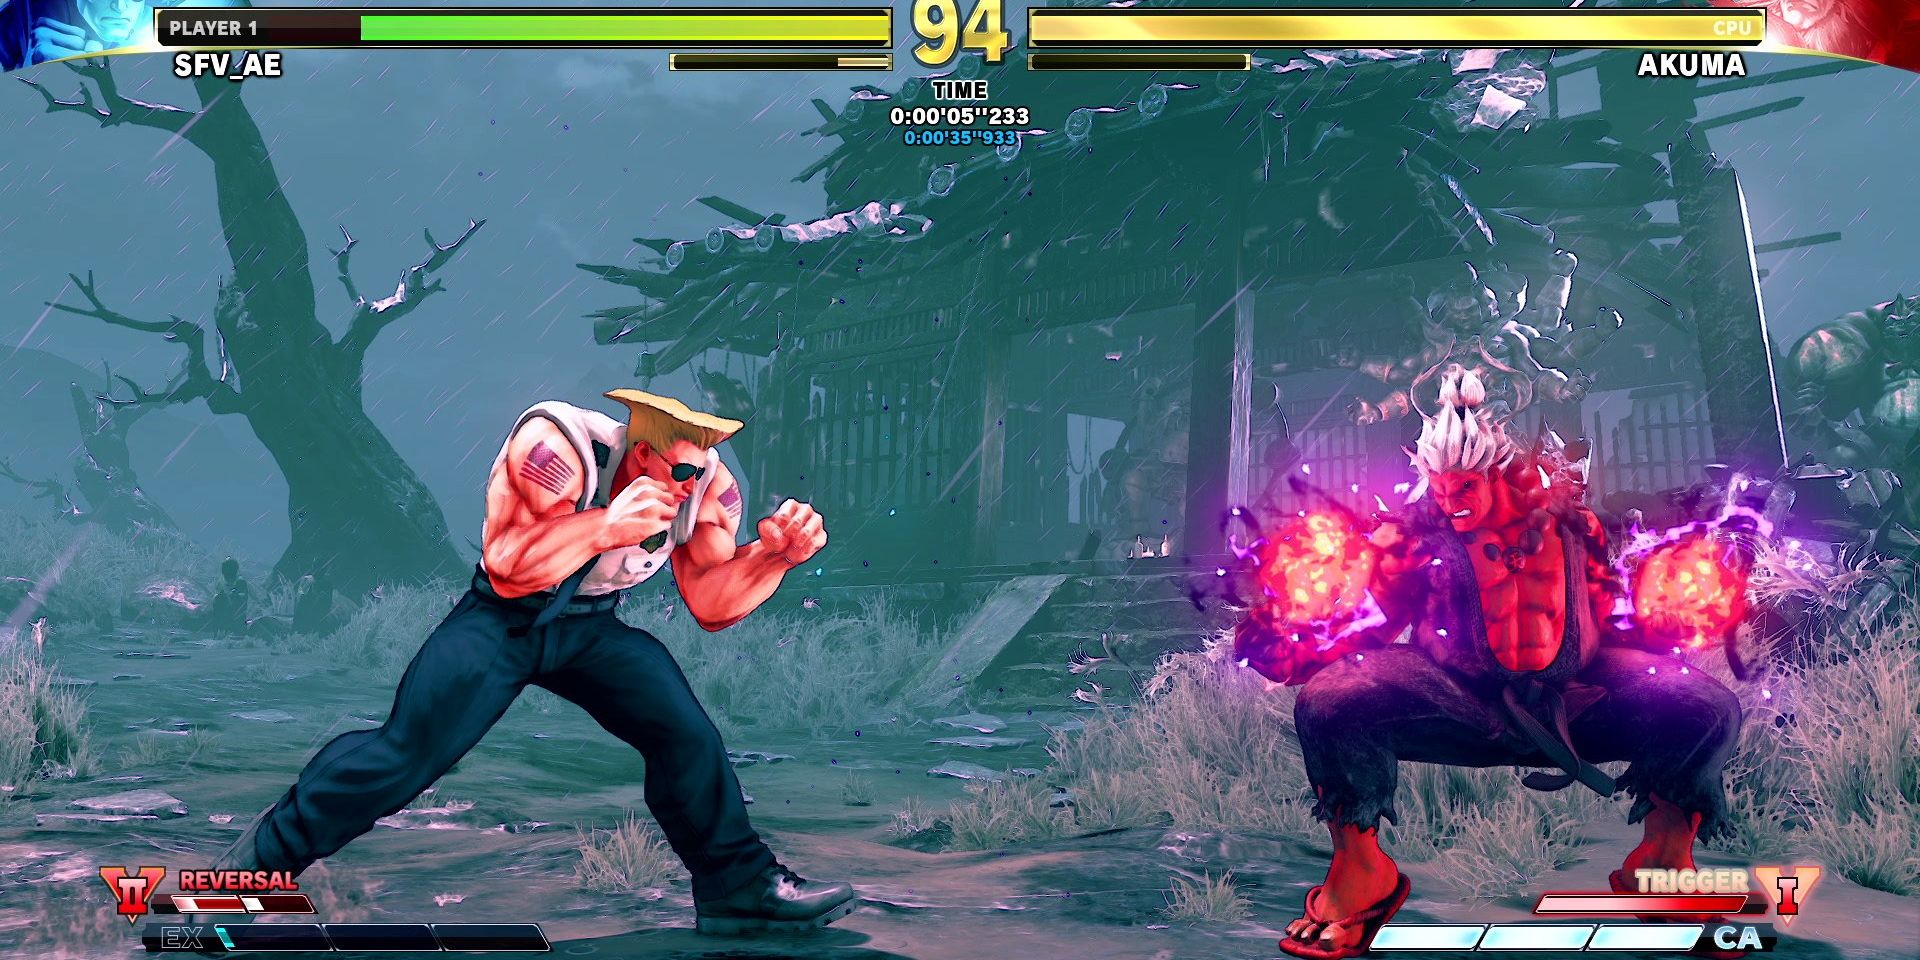 Guile faces off against Shin Akuma in the arcade mode of Street Fighter V Arcade Edition